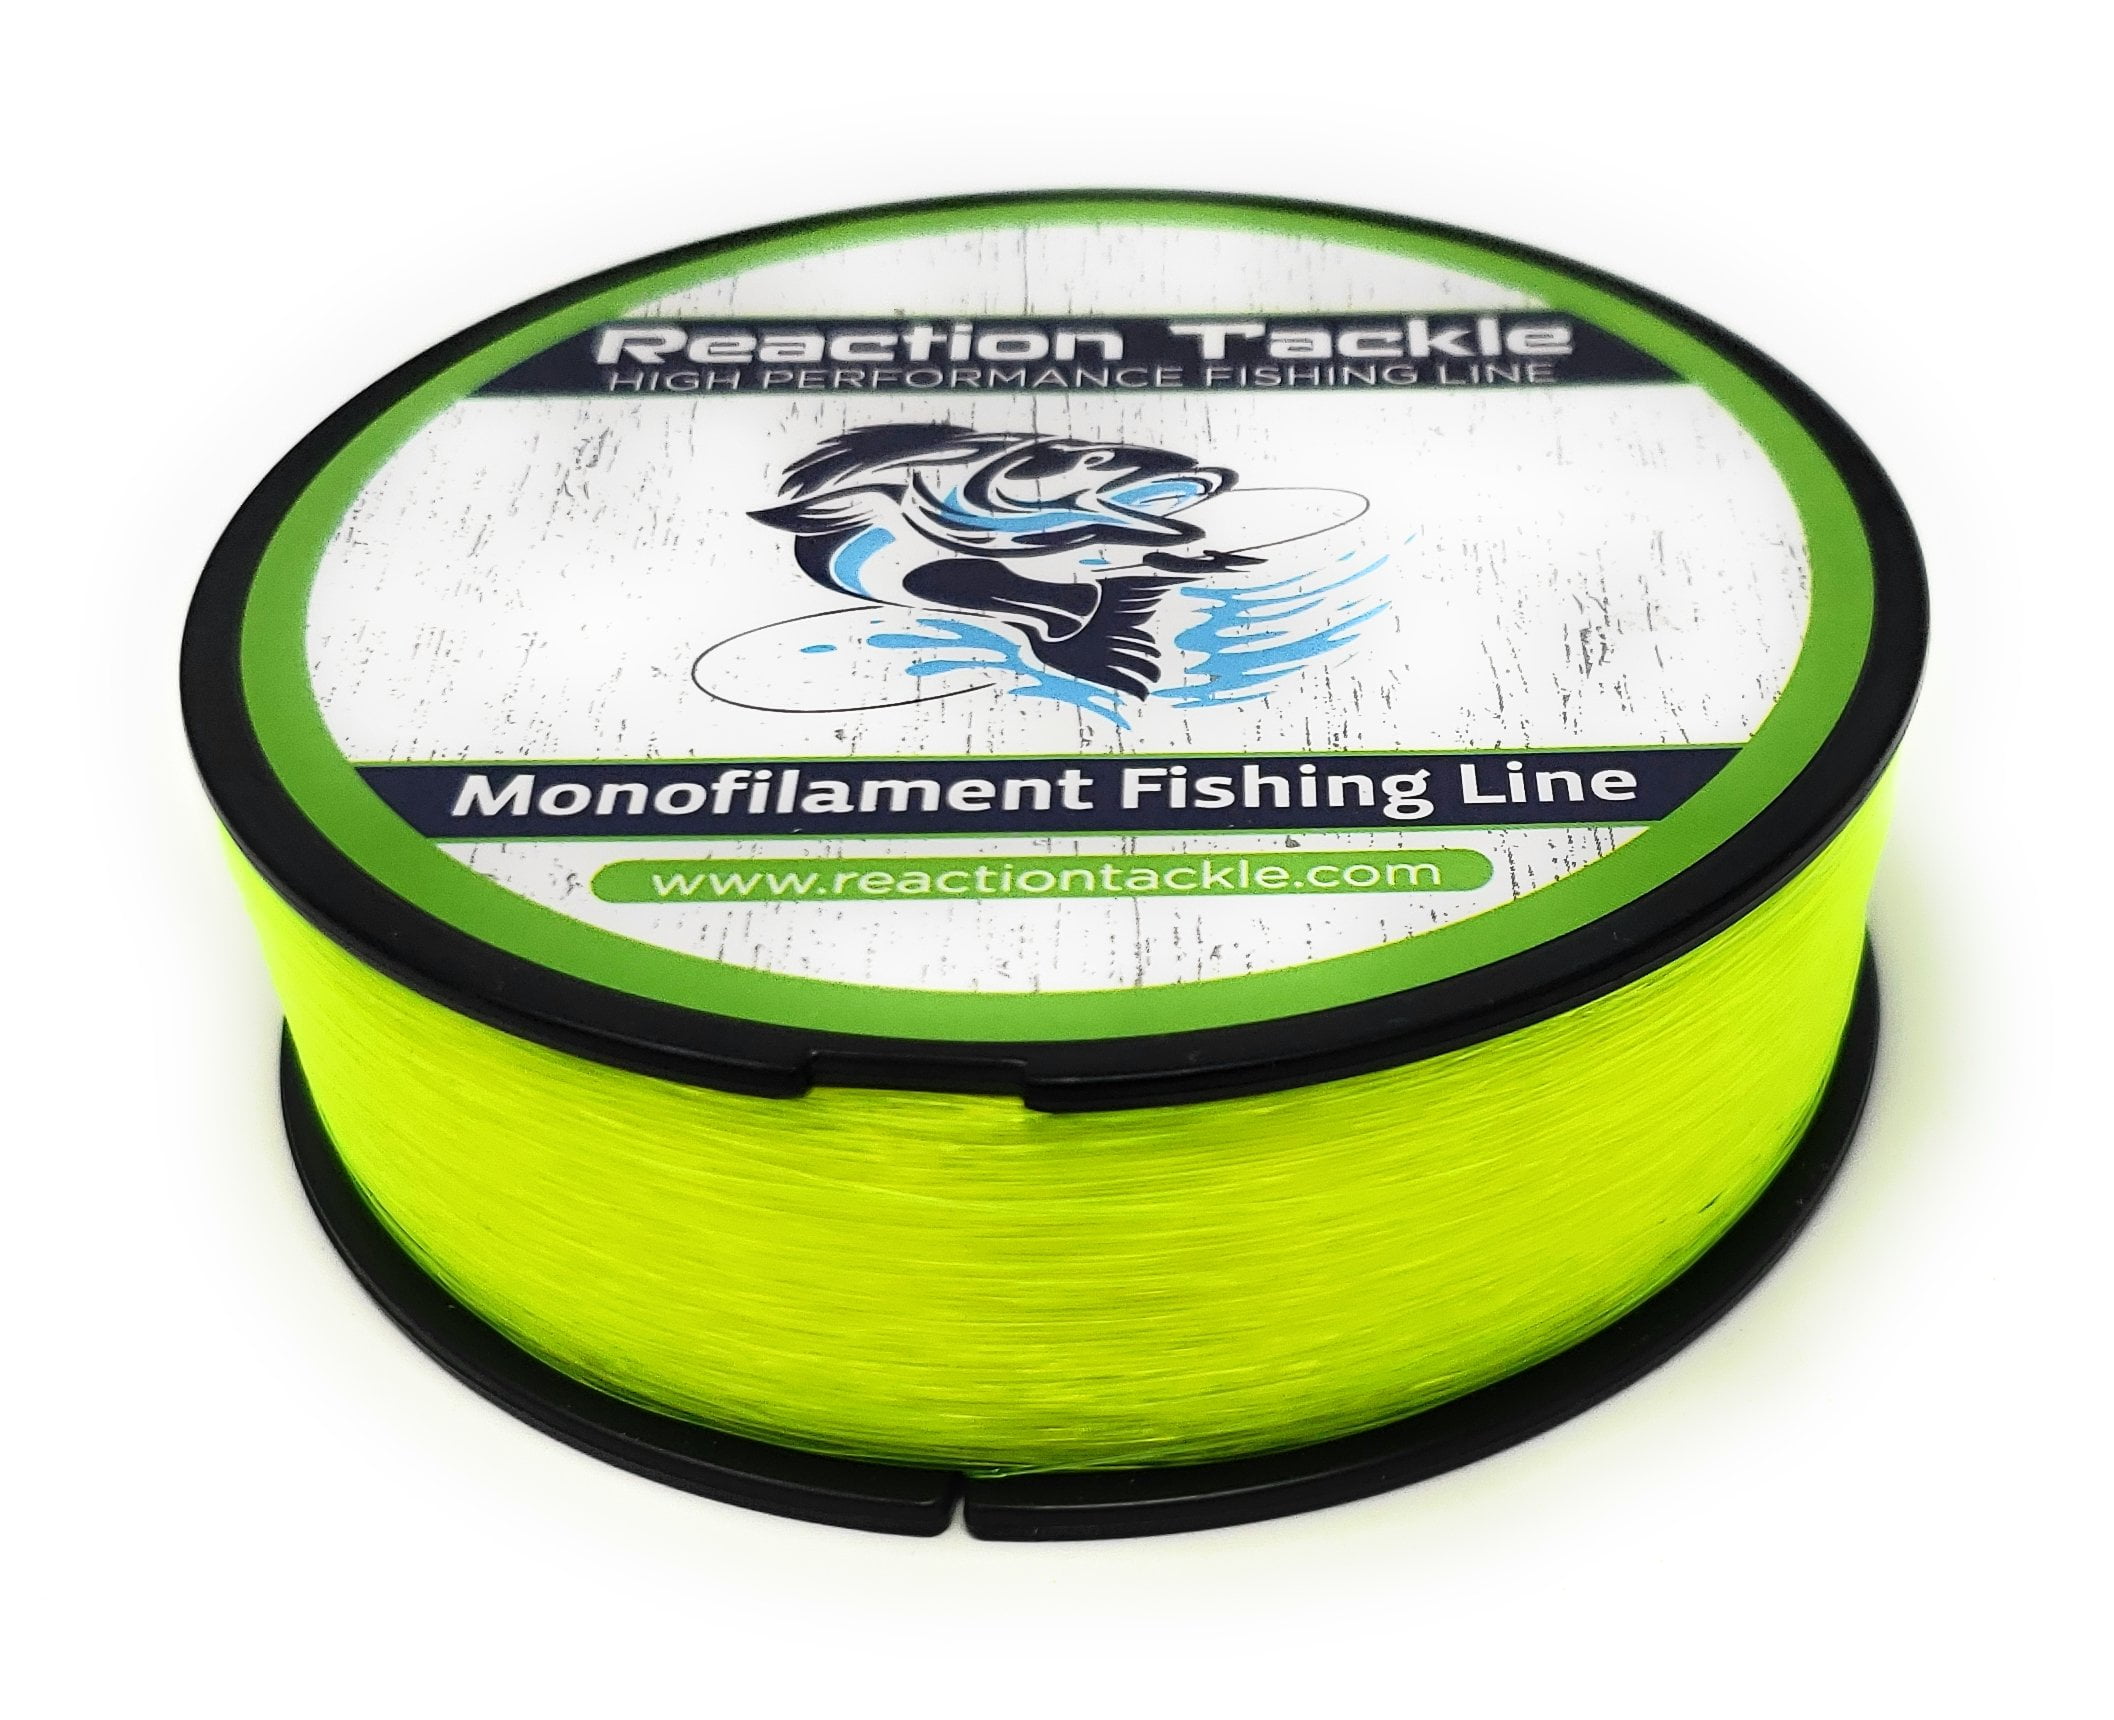 LARGE Spools- Monofilament Fishing line- Various Sizes and Colors